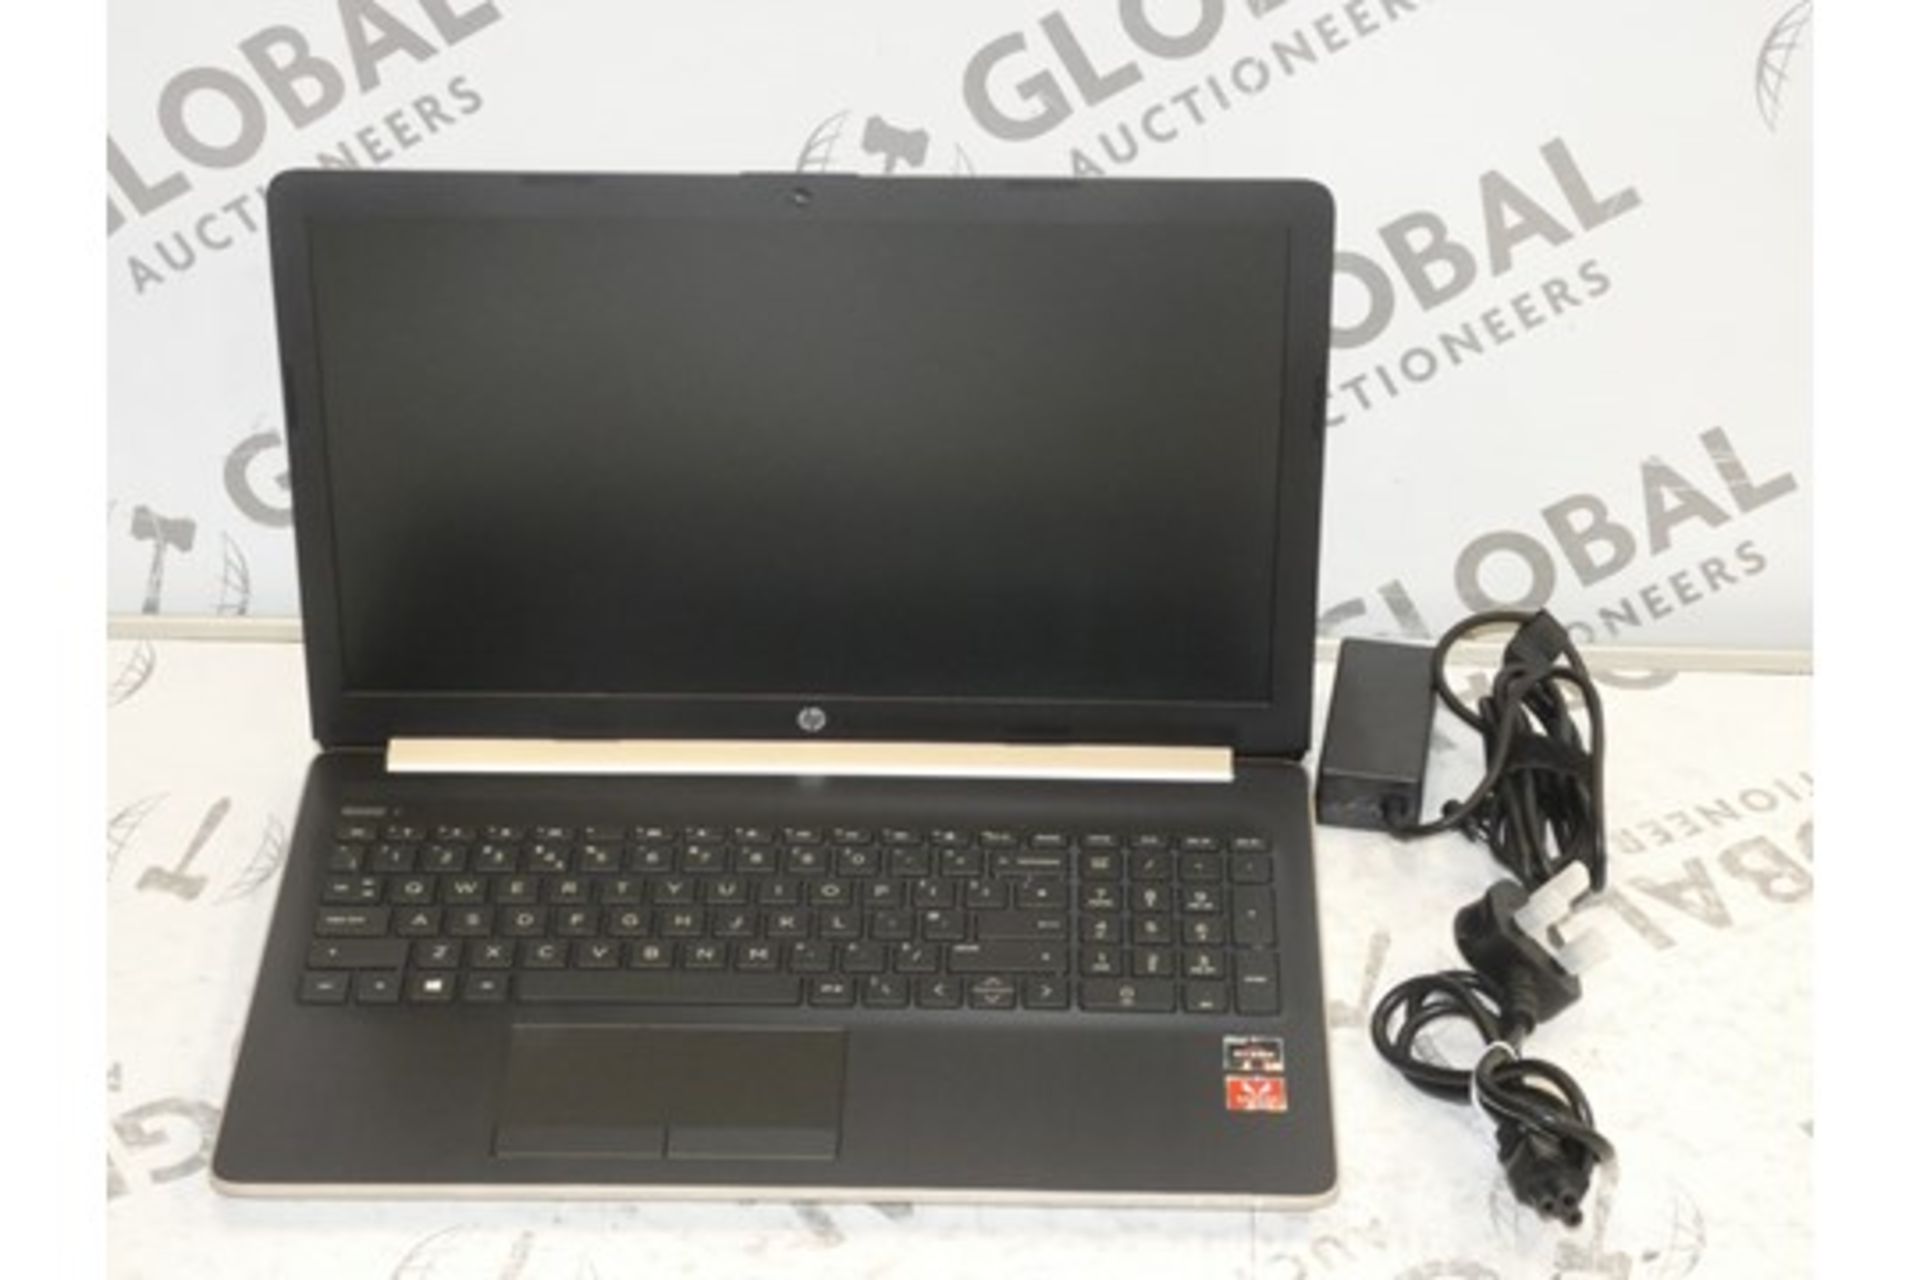 Boxed HP15DB0997NA Rose Gold 15.6Inch Laptop Computer 4Gb Ram 1TerraBite Hard Drive, Integrated